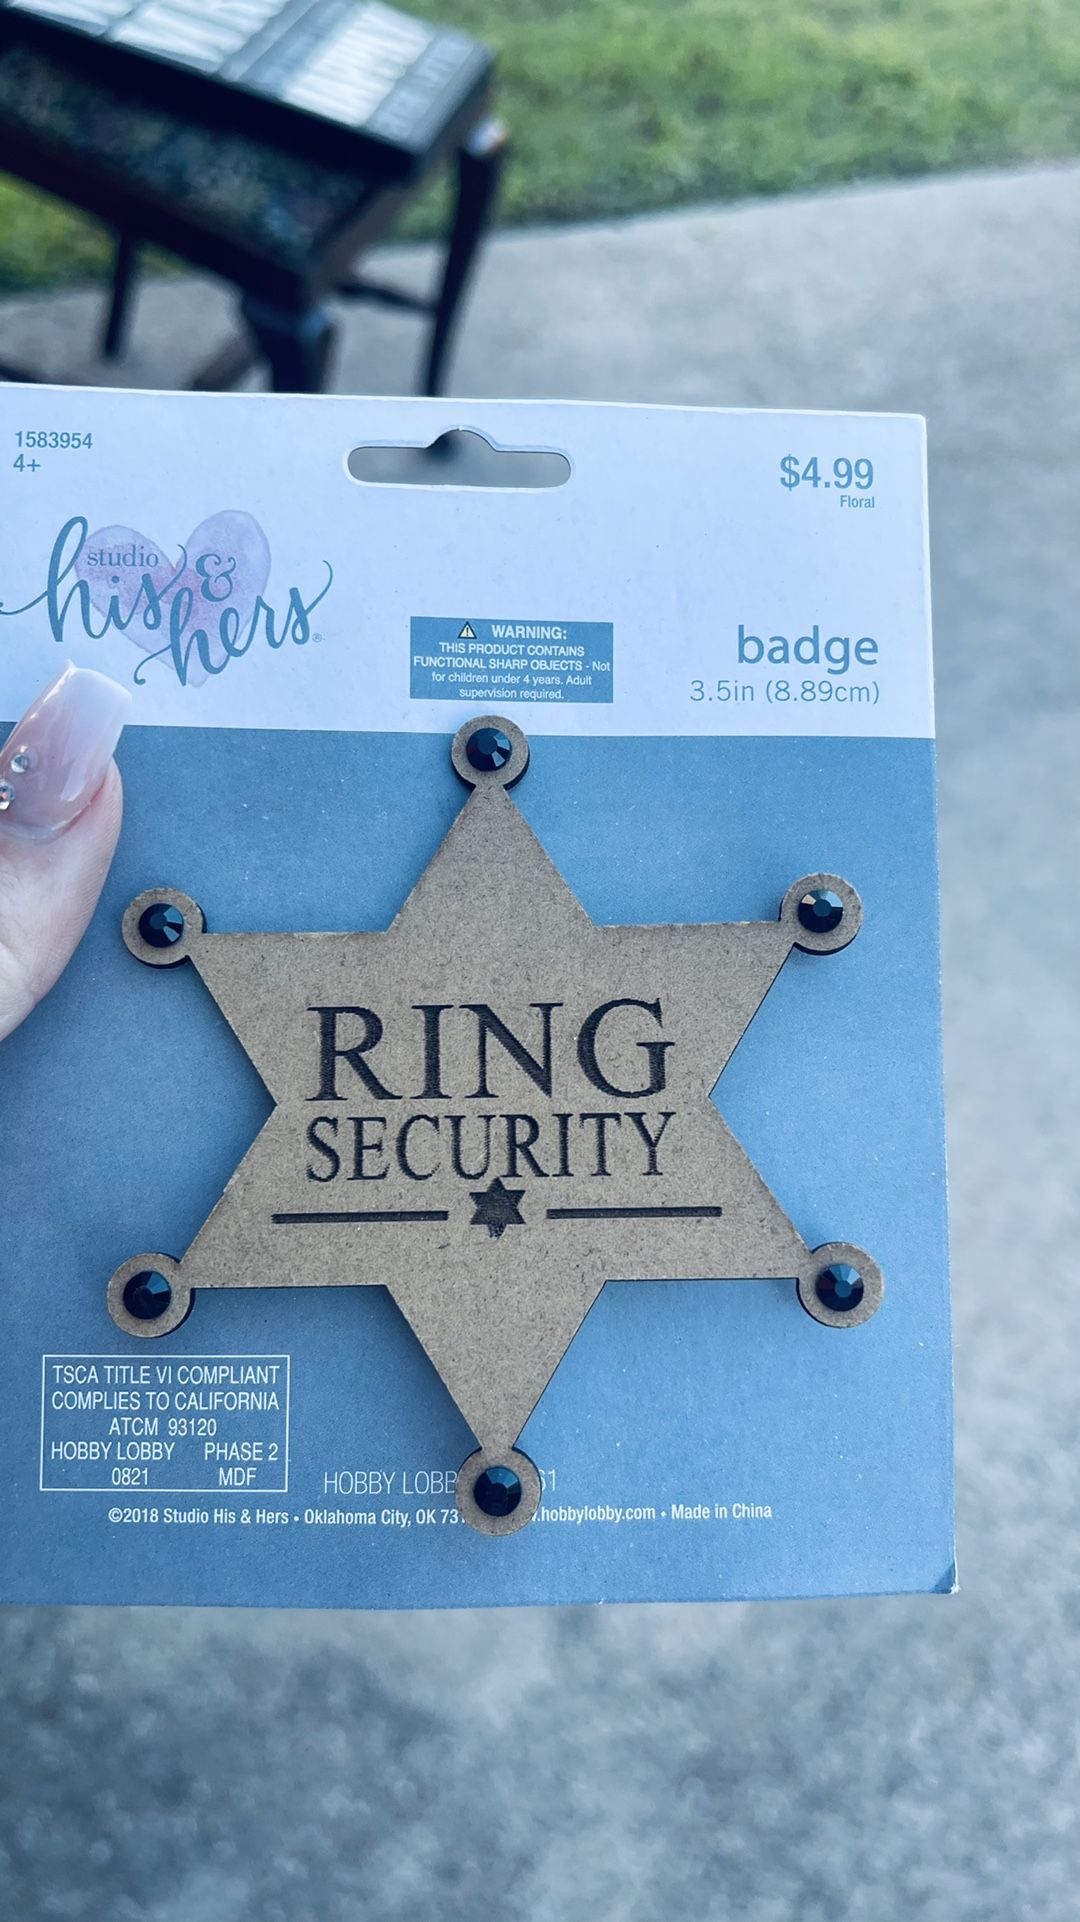 Ring security Badge